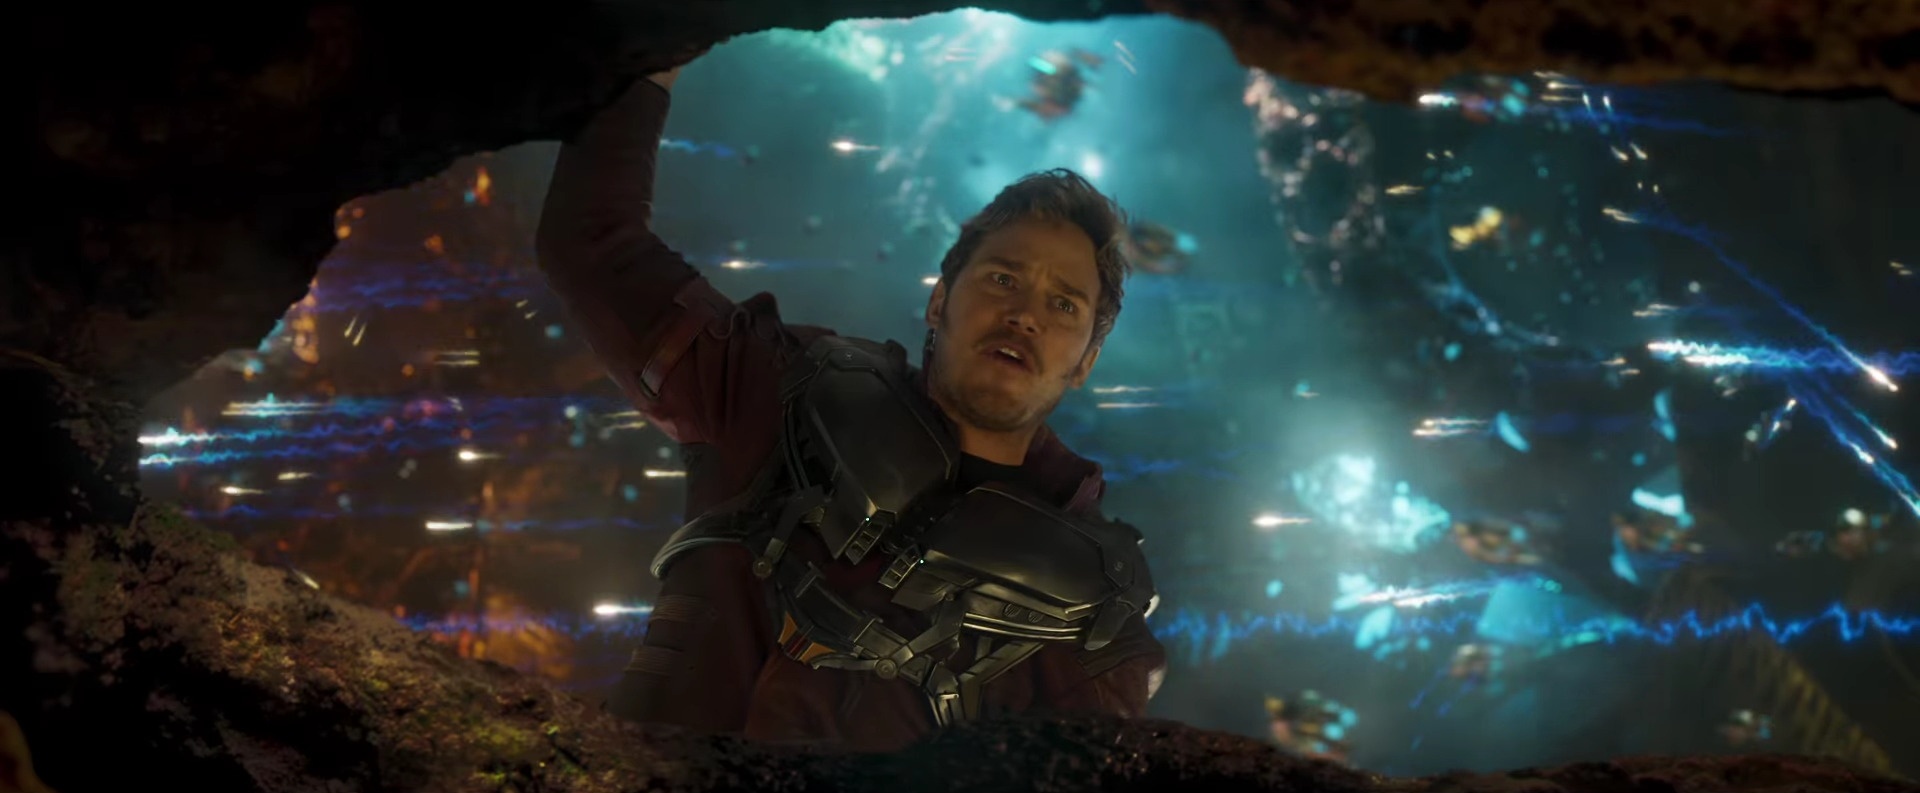 Check out 6 of the most memorable Guardians of the Galaxy Vol. 2 quotes and conversations that give you all the superhero feels!